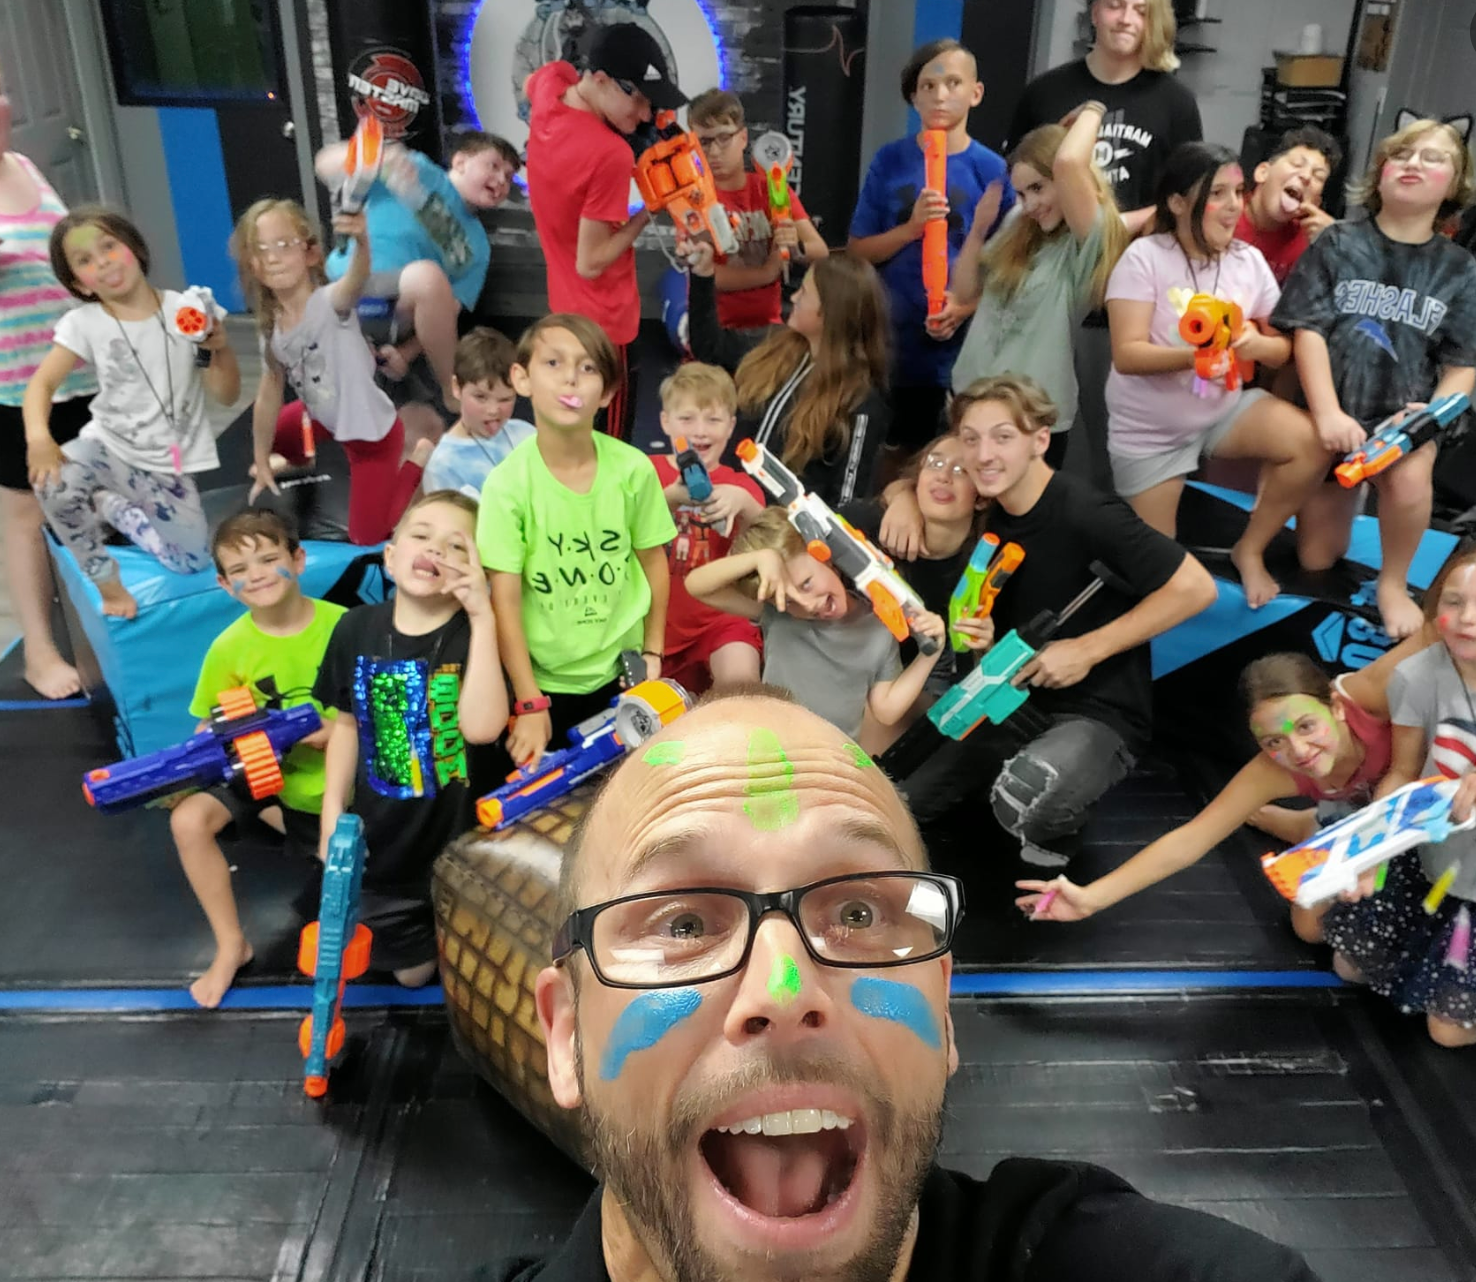 A man with glasses is taking a selfie with a group of children